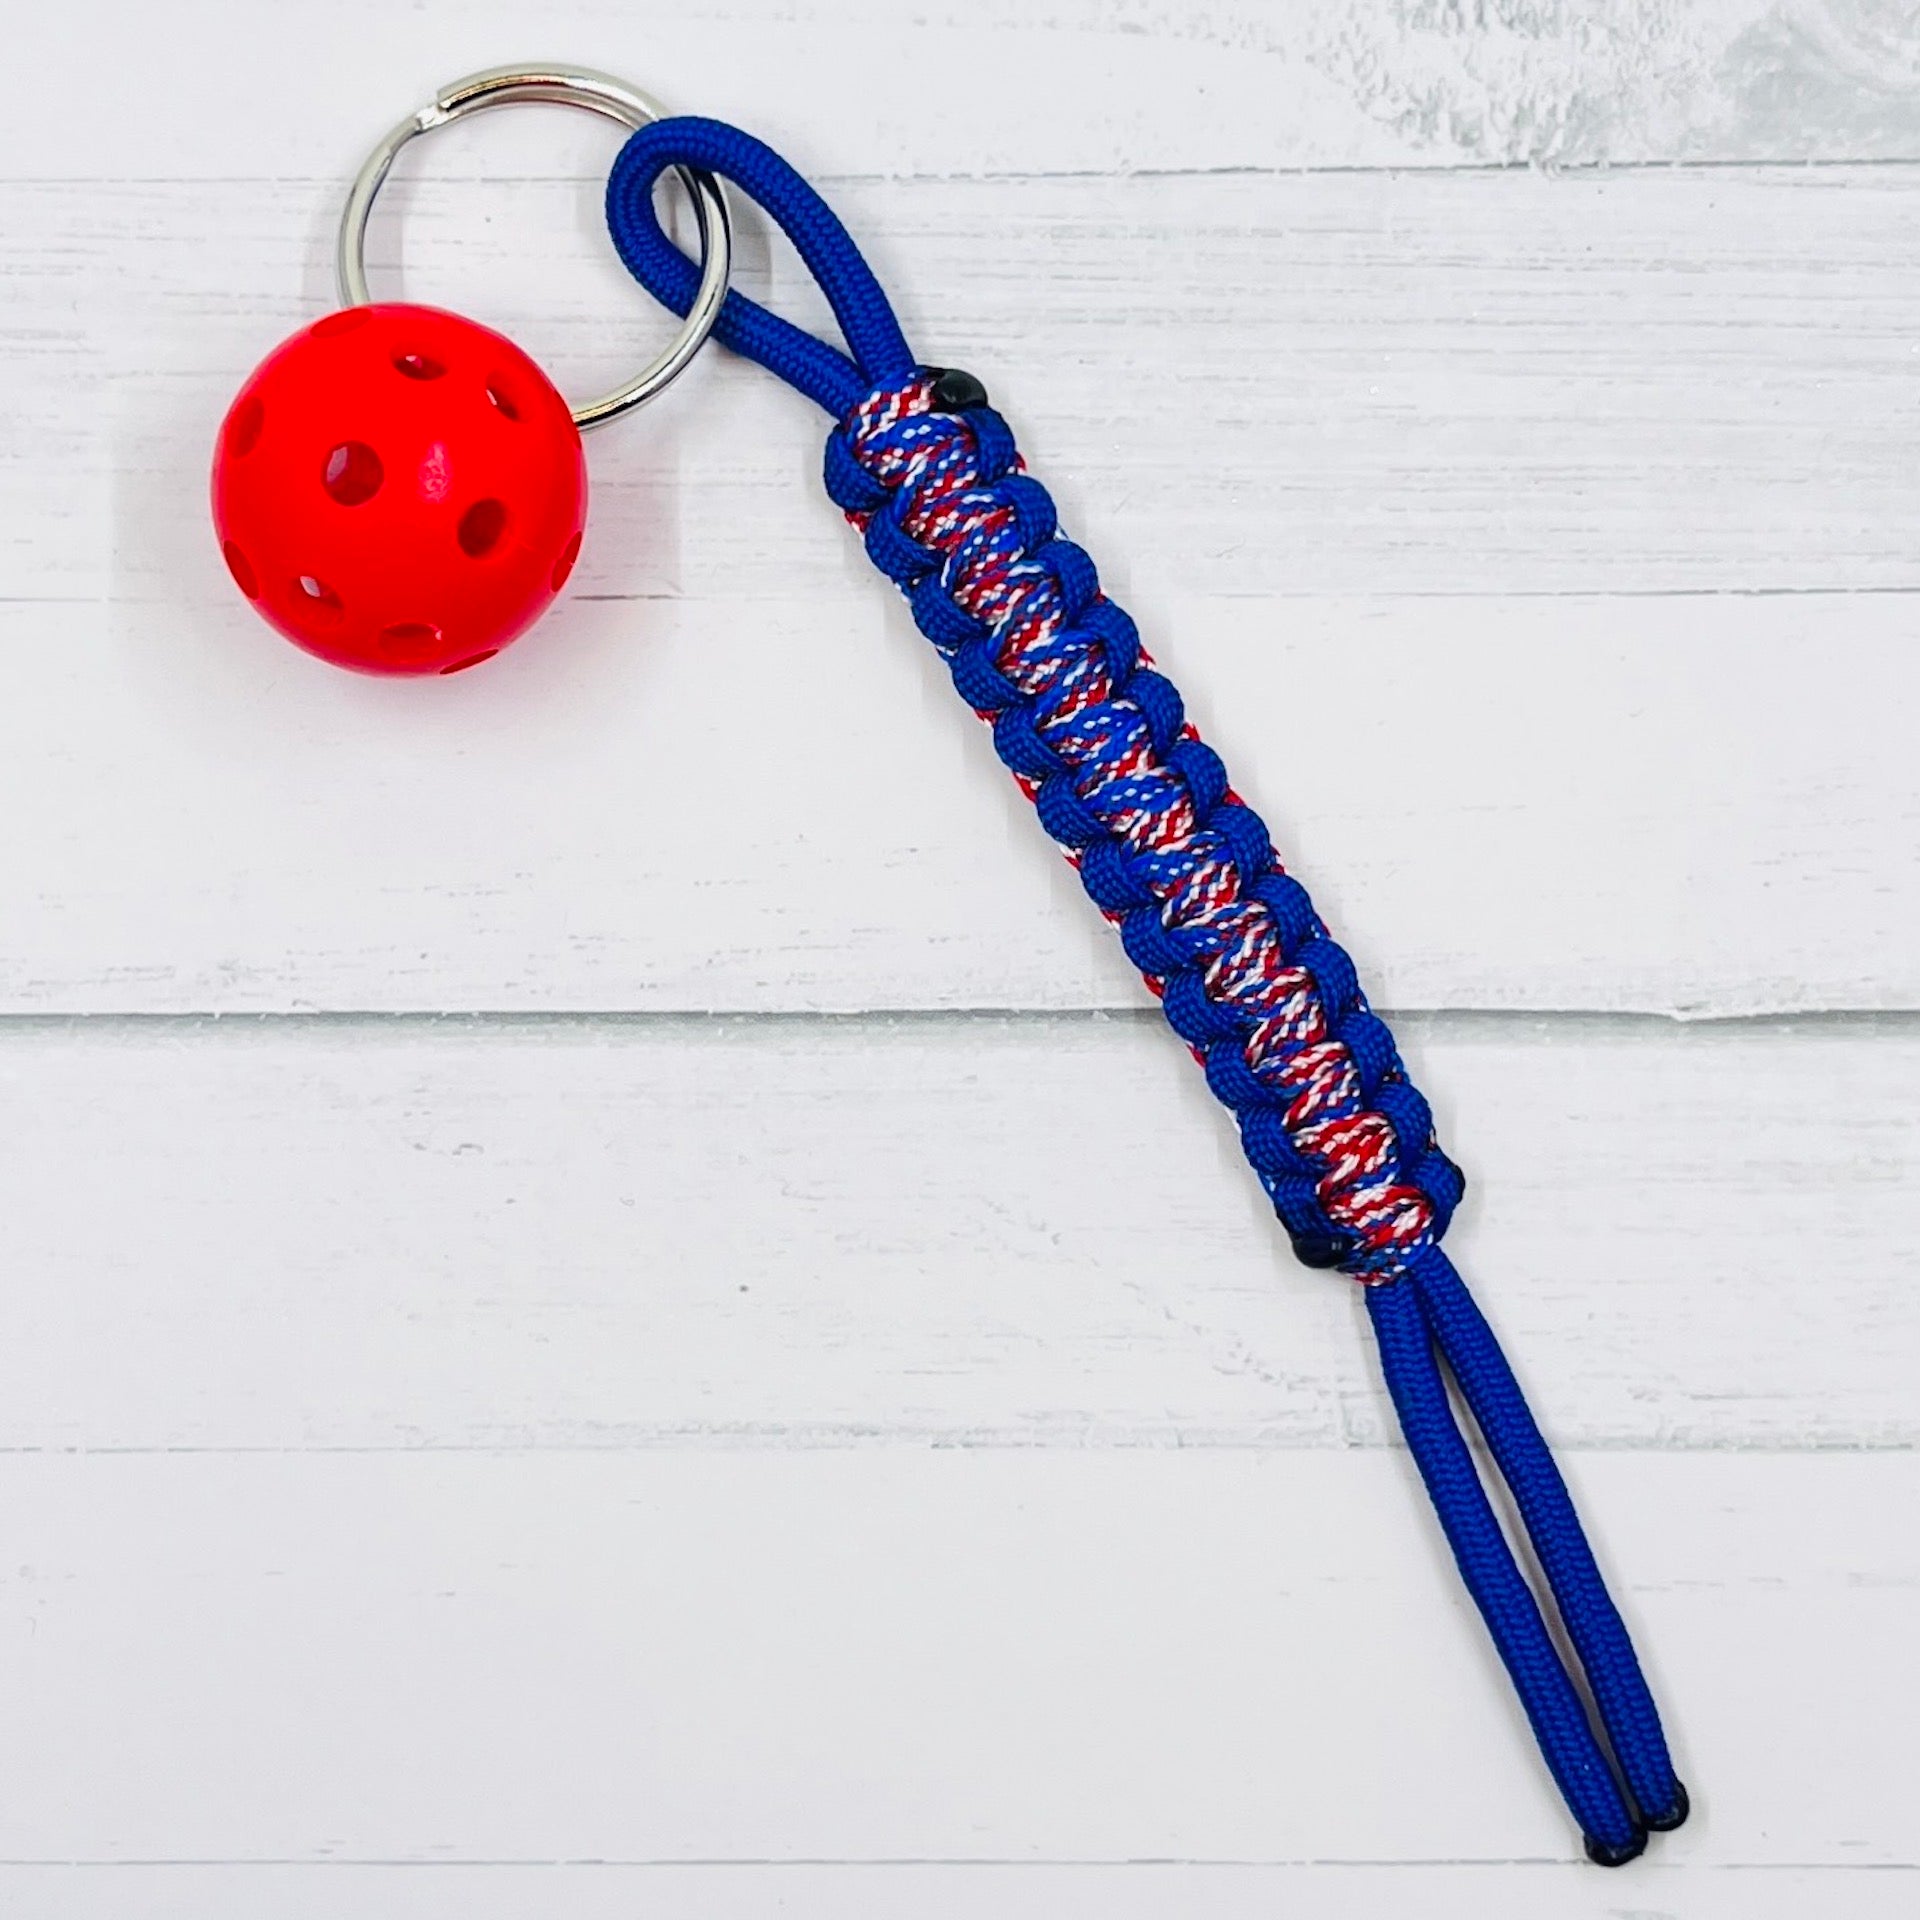 Micro Pickleball Keychain with Pull Tag Lanyard  This keychains are one-a-kind. They are super heavy duty and guaranteed to become your favorite keychain ever. There are multiple colors to choose from (and custom requests are available when possible). You also get to choose the color of ball you would like.  These keychains make it is so much easier to find your keys, especially in a purse. They are easy to carry also.